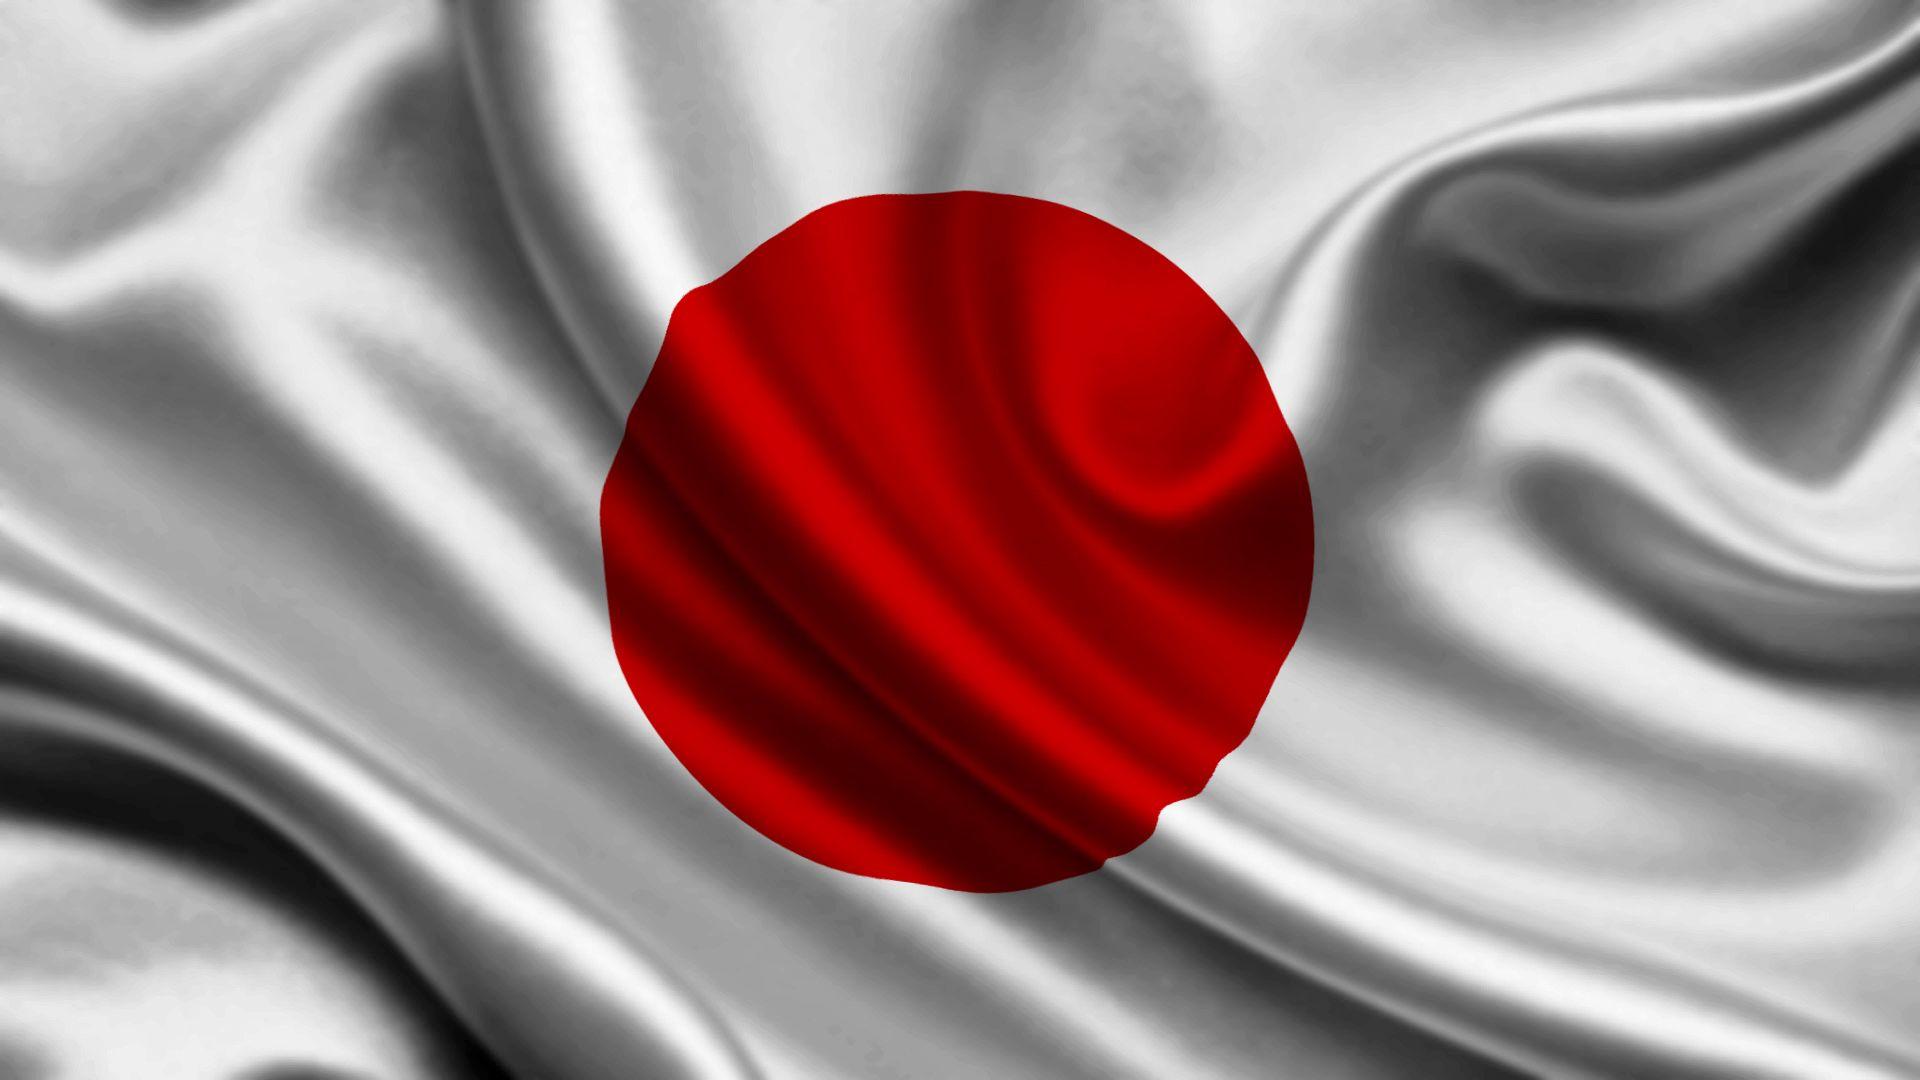 Japan Flag Wallpapers Top Free Japan Flag Backgrounds Wallpaperaccess